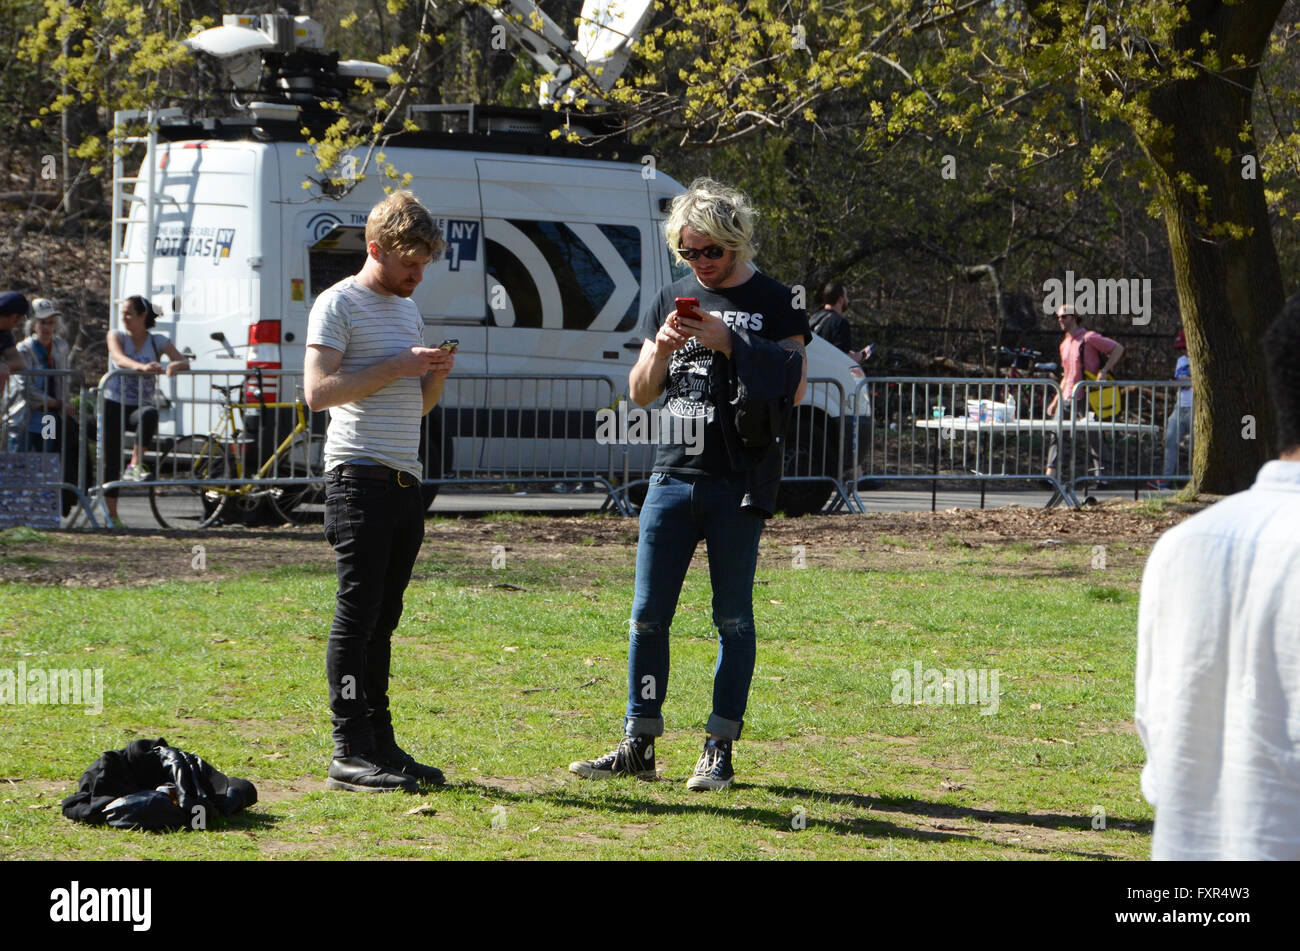 Brooklyn, New York, USA. 17th April, 2016. hipsters at Bernie Sanders Prospect Park Brooklyn april 17th 2016 Credit:  simon leigh/Alamy Live News Stock Photo